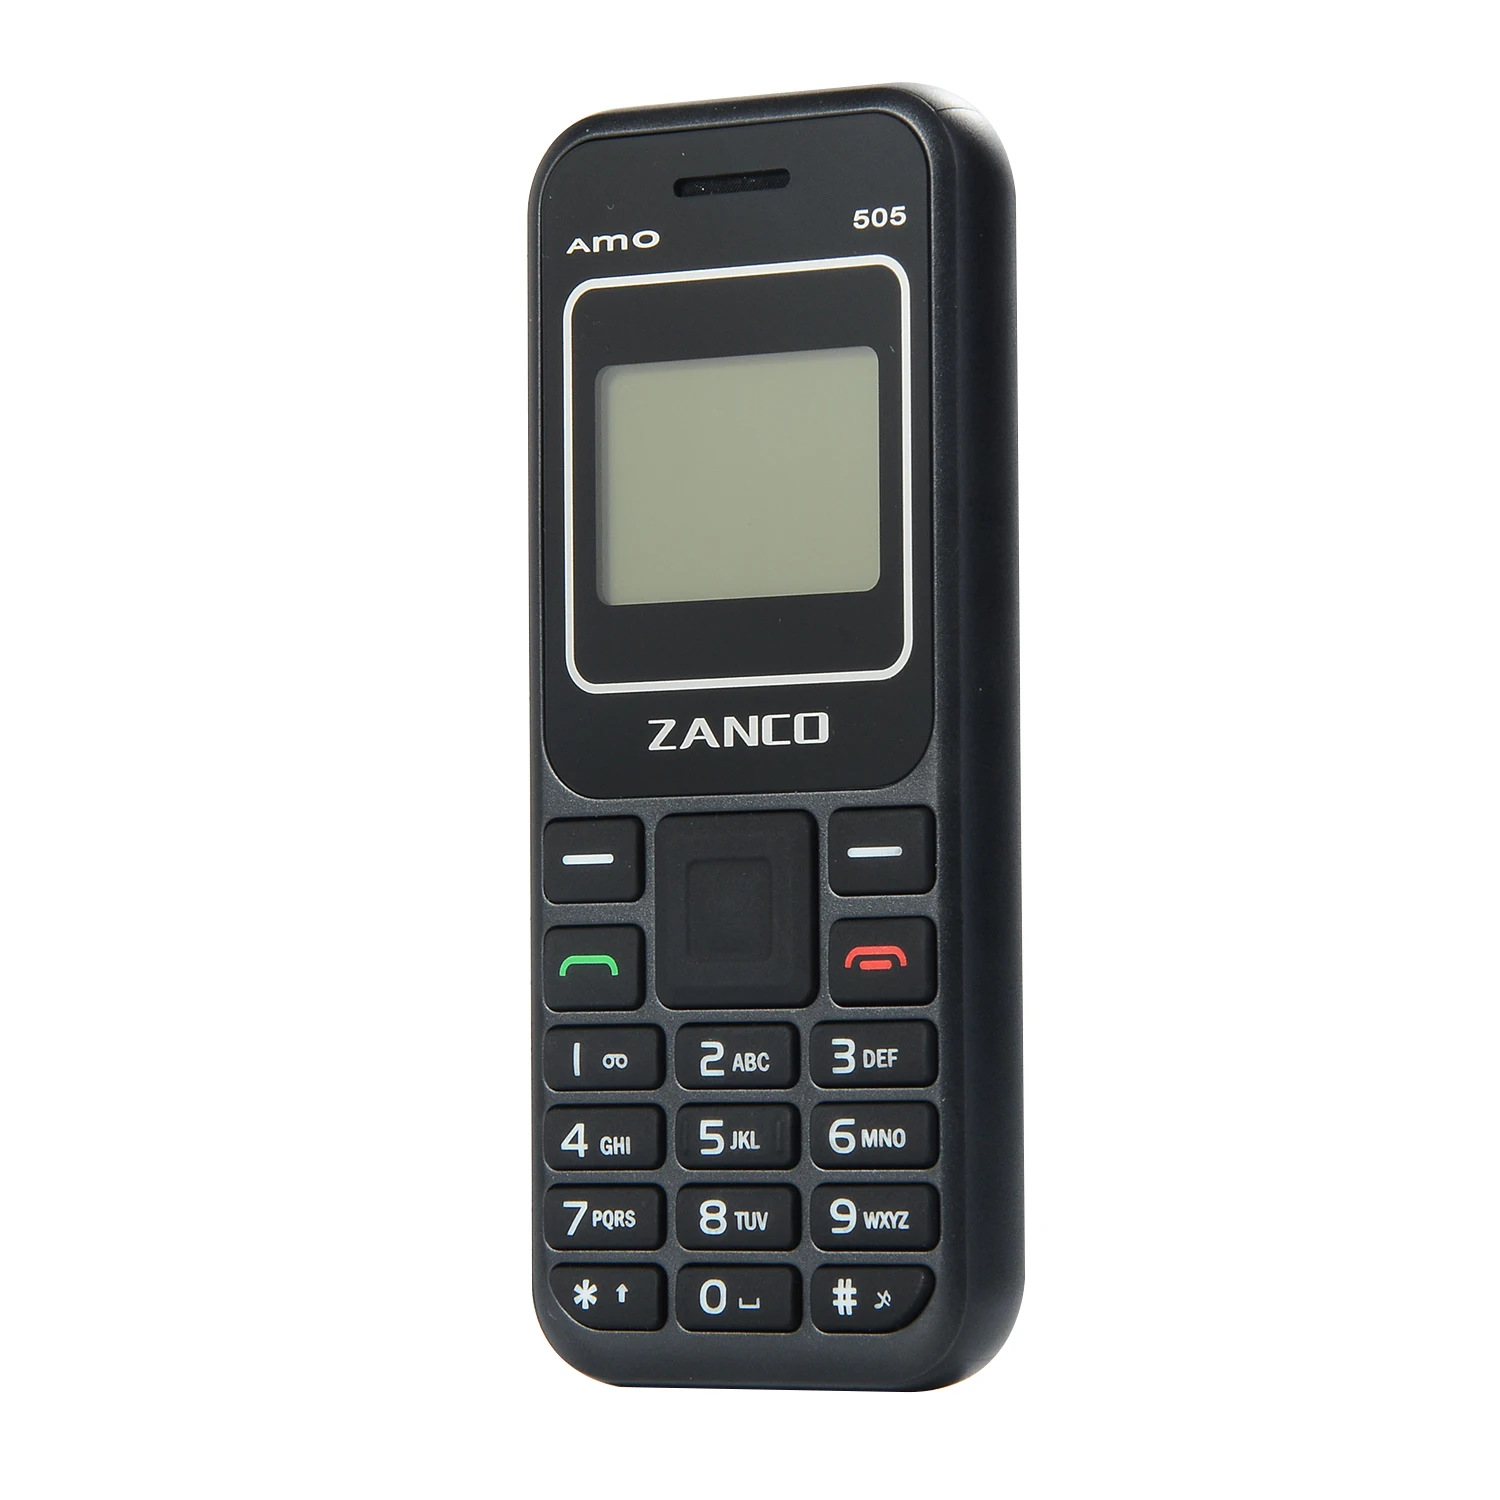 ZANCO AMO 505 1.44 inch Screen cheapest cell phone cellular phone feature phone functional phone 2